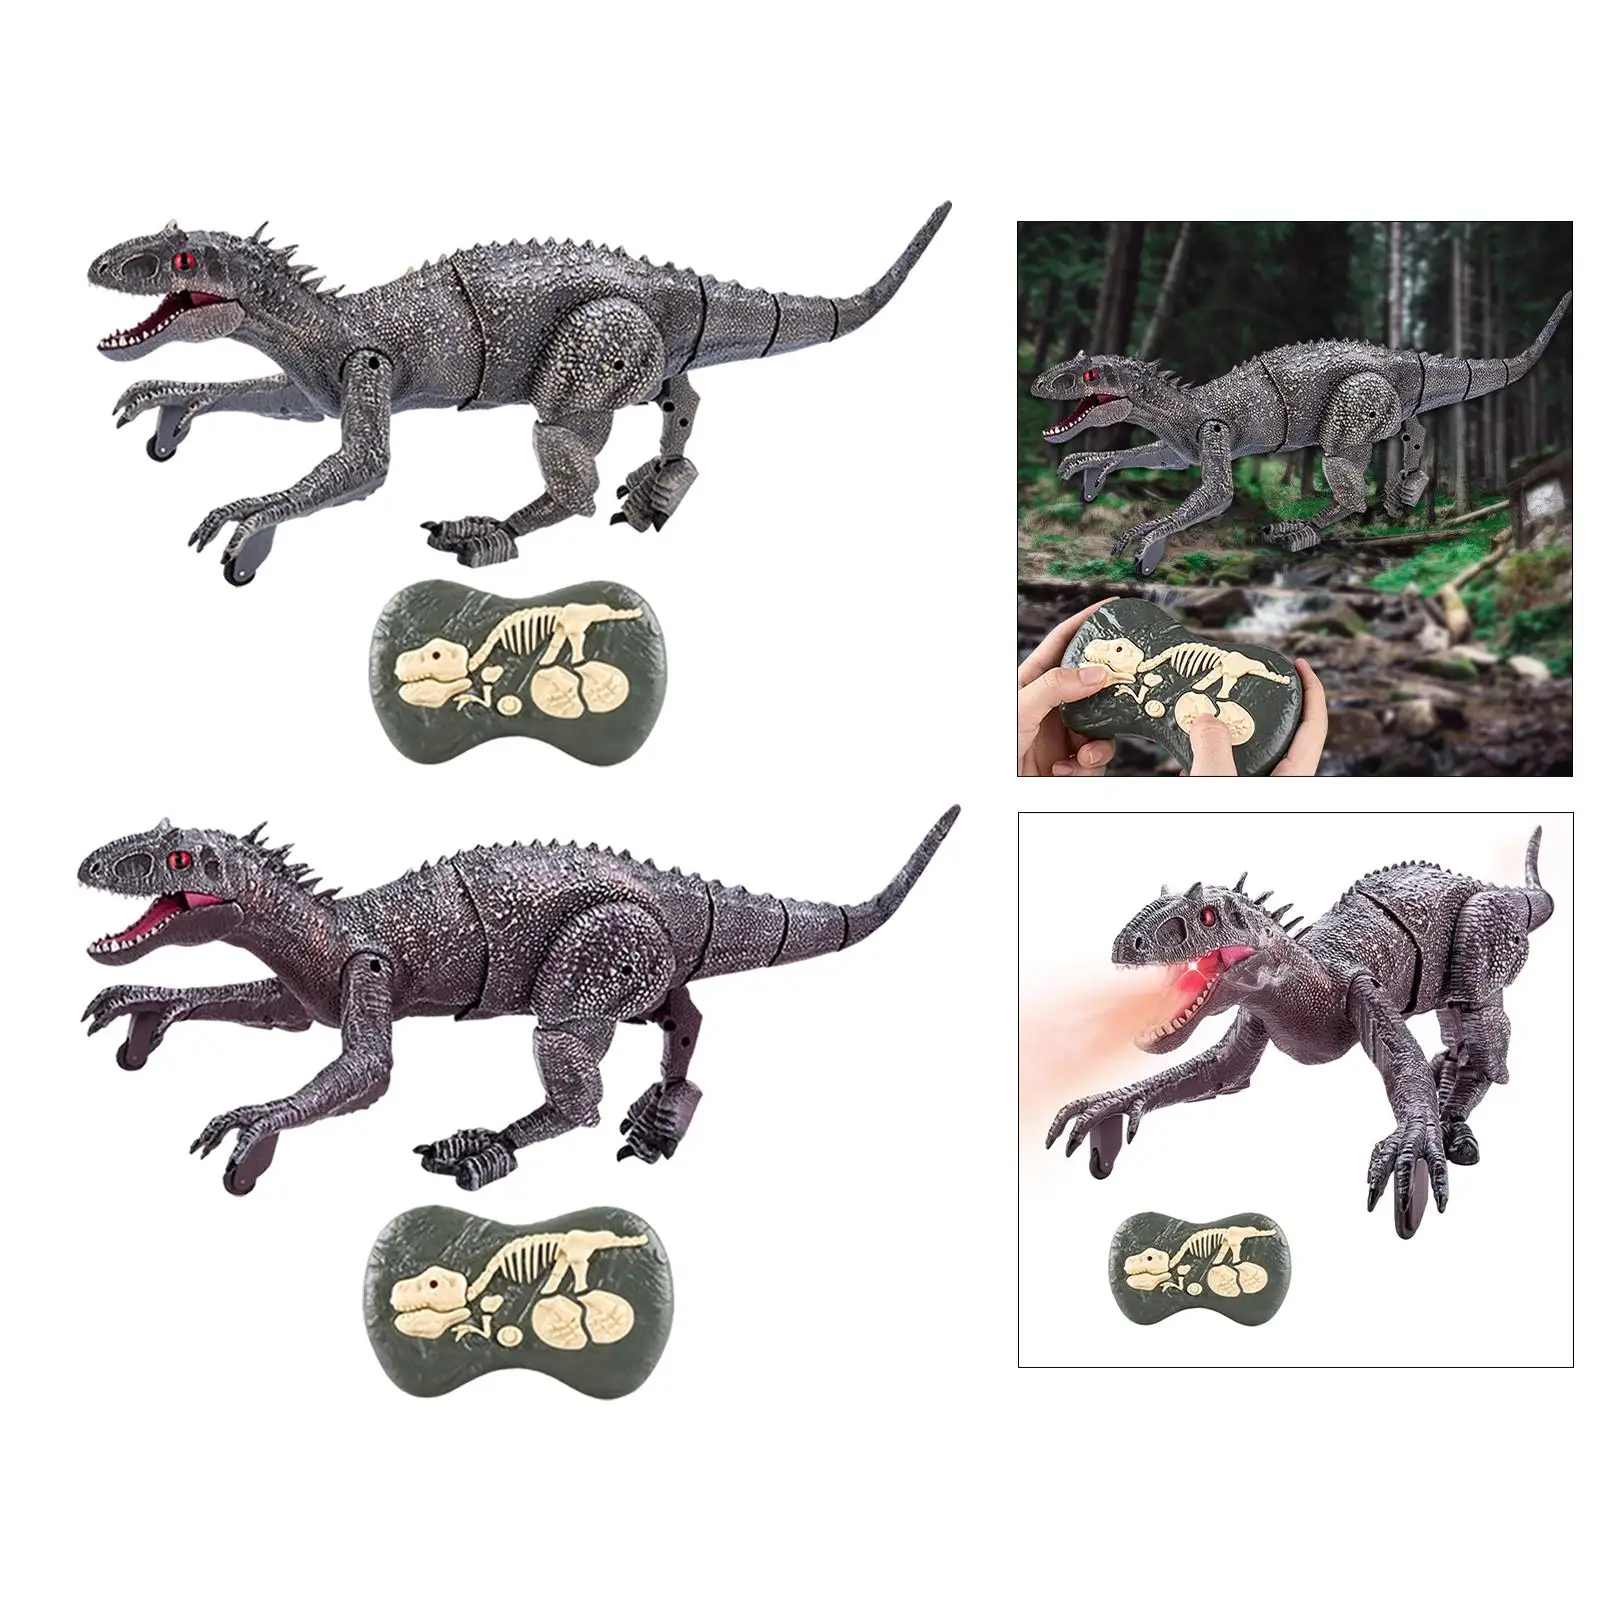 Remote Control Walking Dinosaur Toy Intelligent Interactive with Roaring Sounds for Boys Gifts Christmas Gift